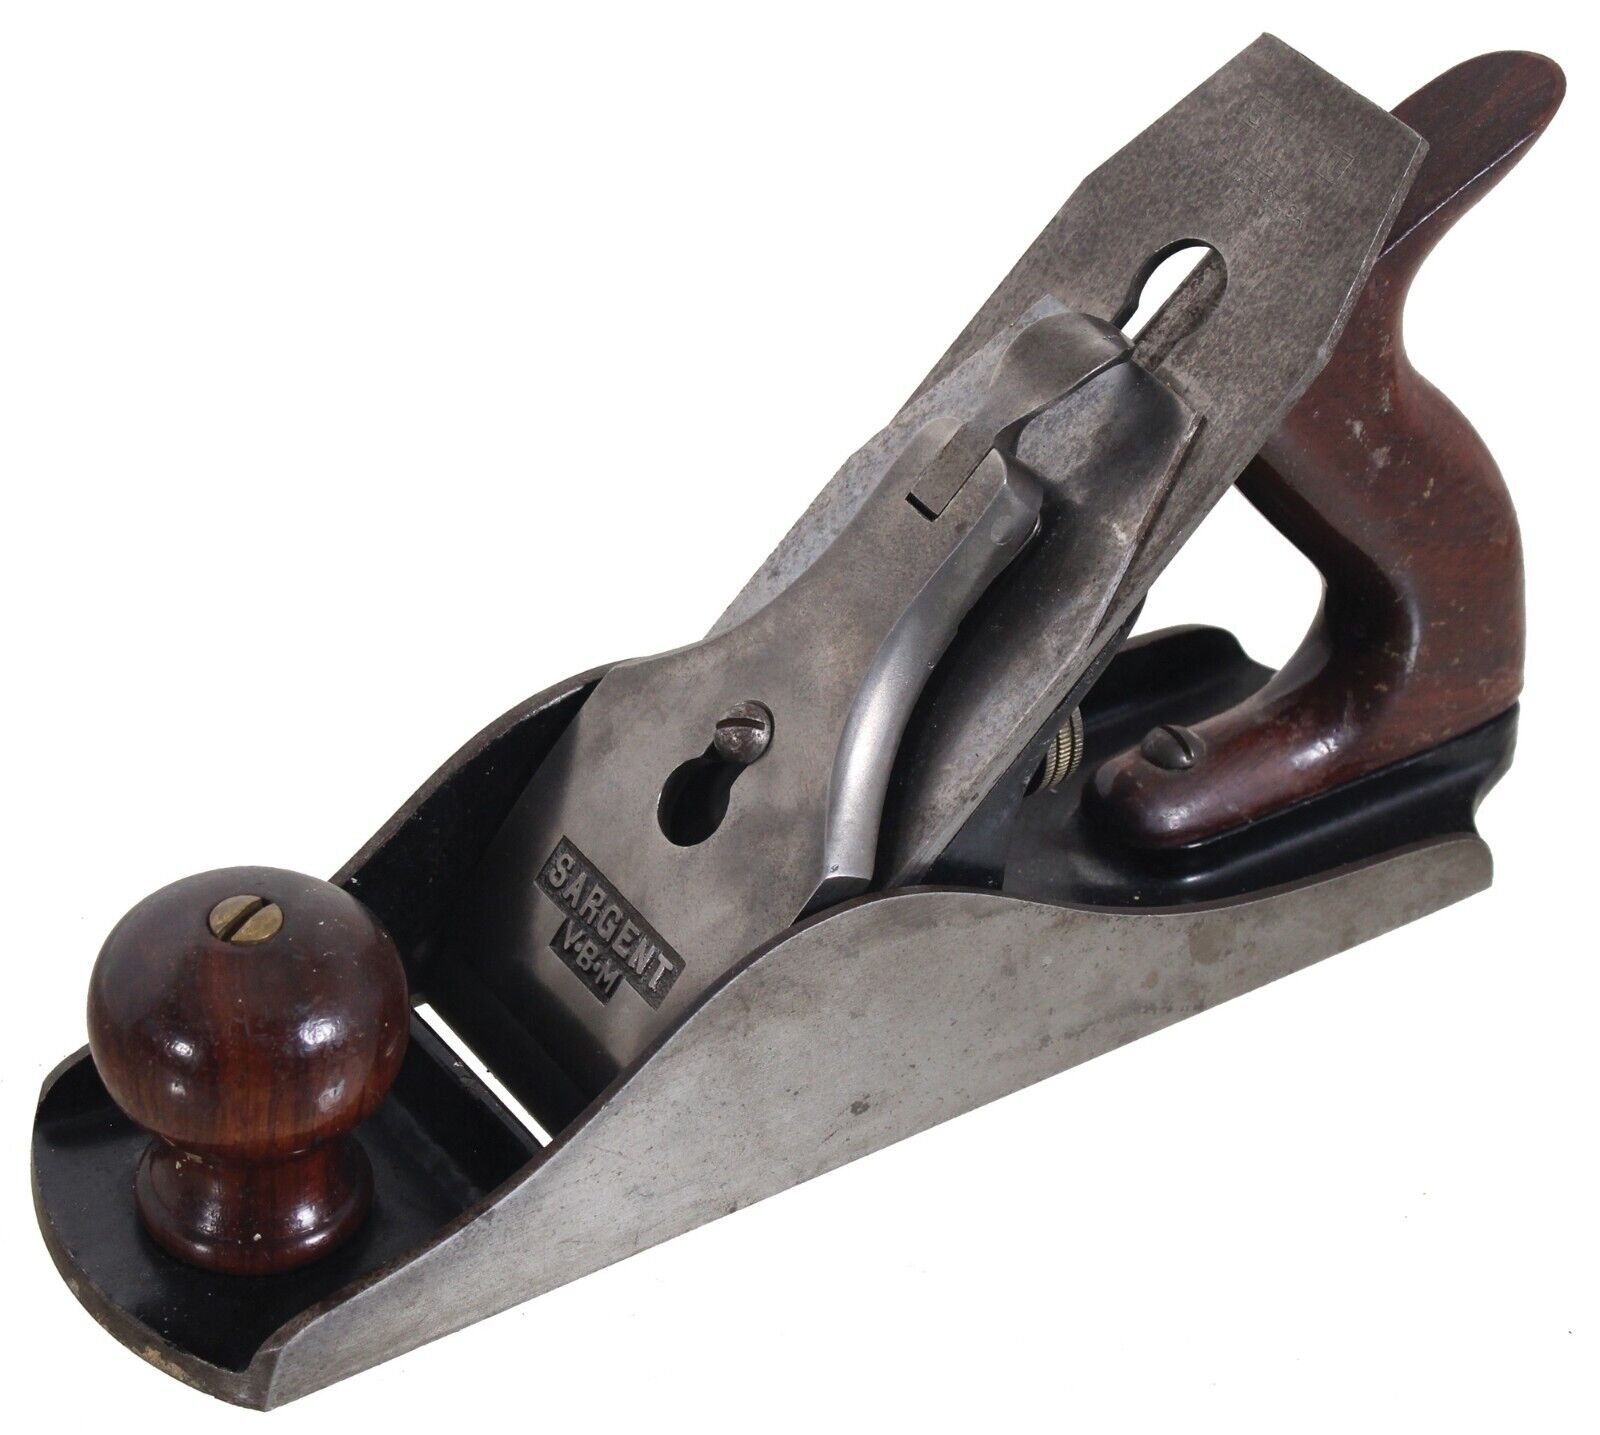 Founder's Grade Sargent No. 410 Heavy Smoothing Plane - Perfect - mjdtoolparts